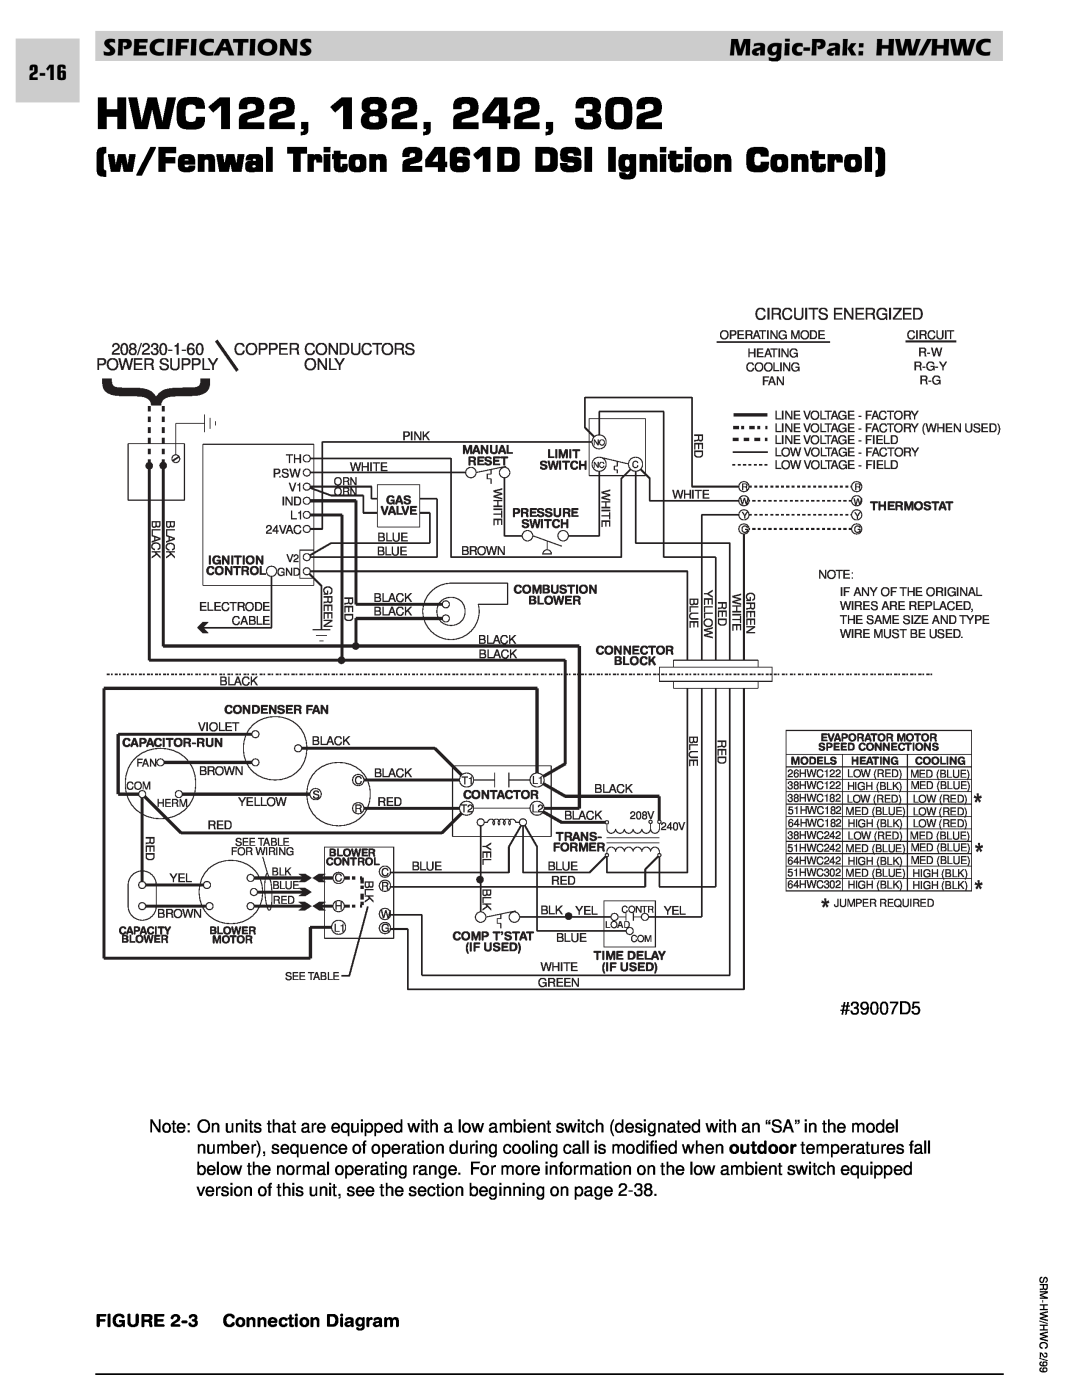 Armstrong World Industries 243, 302 HWC122, 182, 242, w/Fenwal Triton 2461D DSI Ignition Control, 3 Connection Diagram 